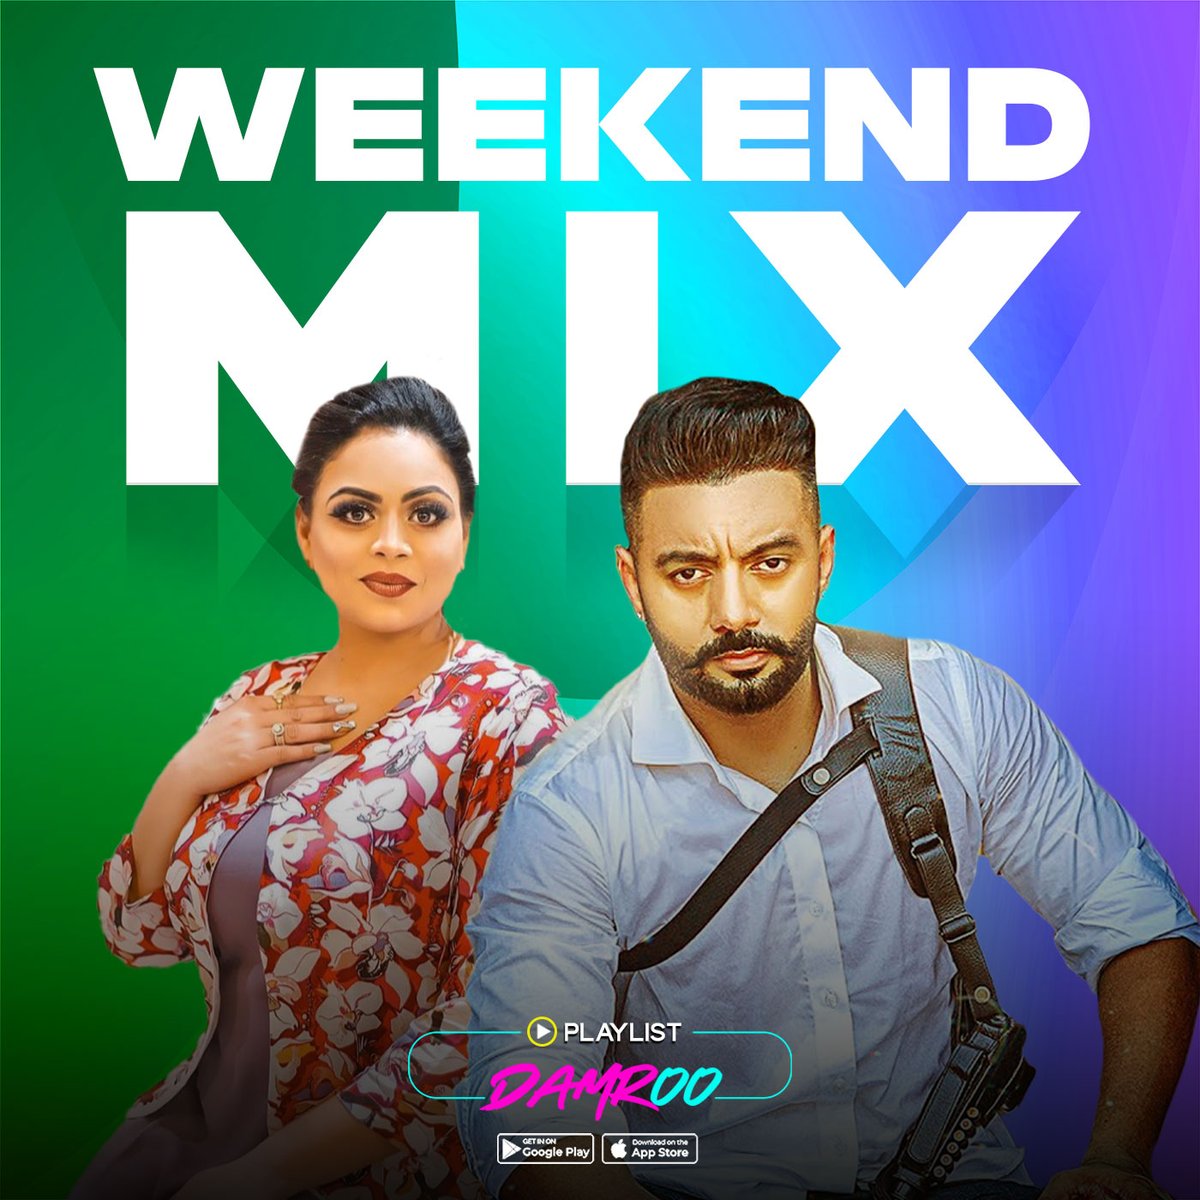 Groove into the Weekend: Your Ultimate Mix for Music, Chill, and Good Vibes 🎶🎉

Download the Damroo App Now! #DeshKiDhunDamrooParSunn

#Weekend #WeekendVibes #weekendfun #weekendmood #Playlist #weekendmix #newsongs #damroo #damroomusicapp #GoodVibes #music #artist